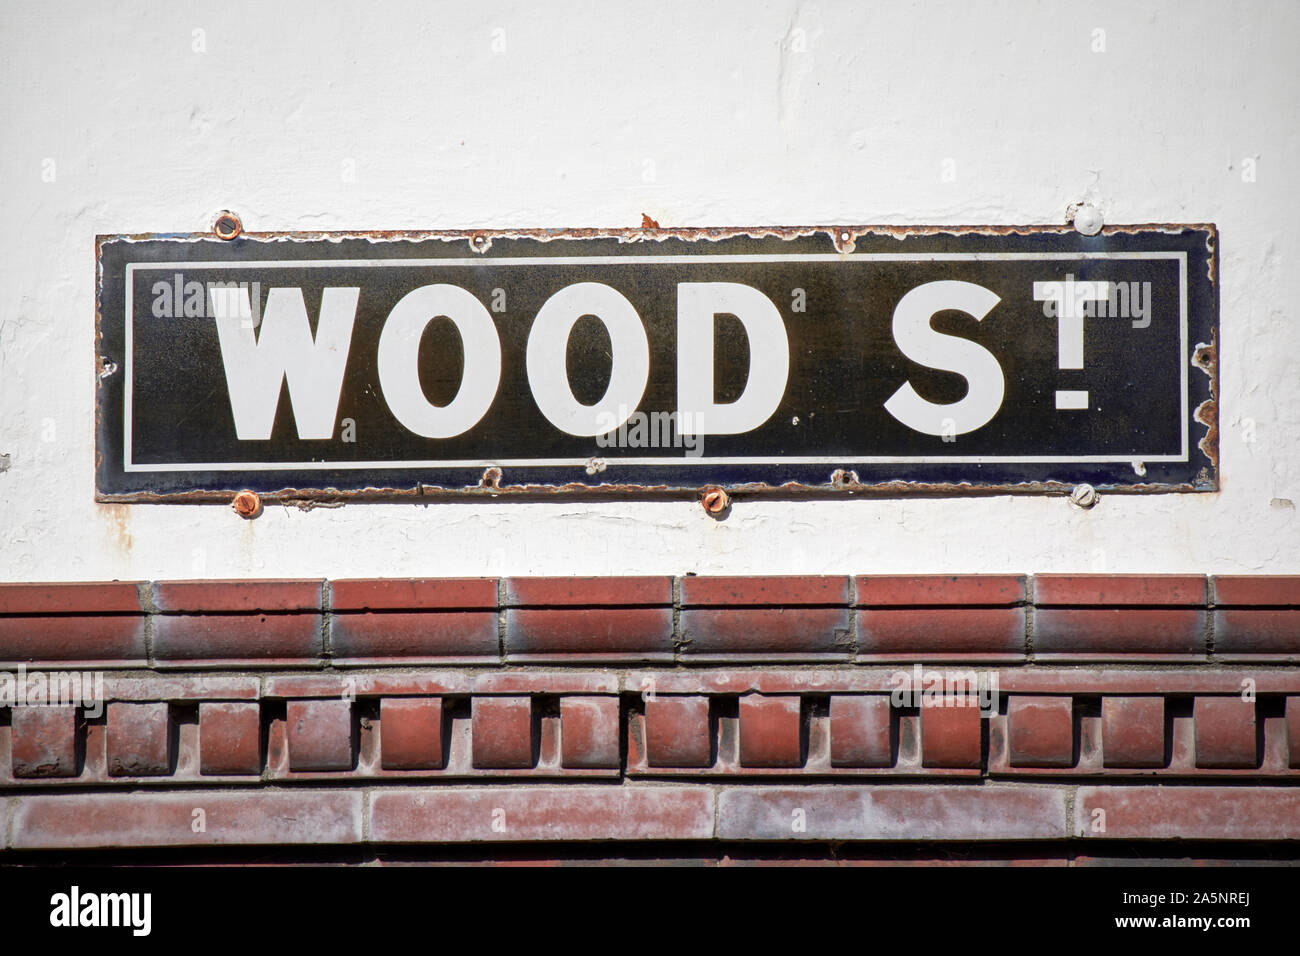 old worn metal street sign for wood street in Port Sunlight England UK Stock Photo